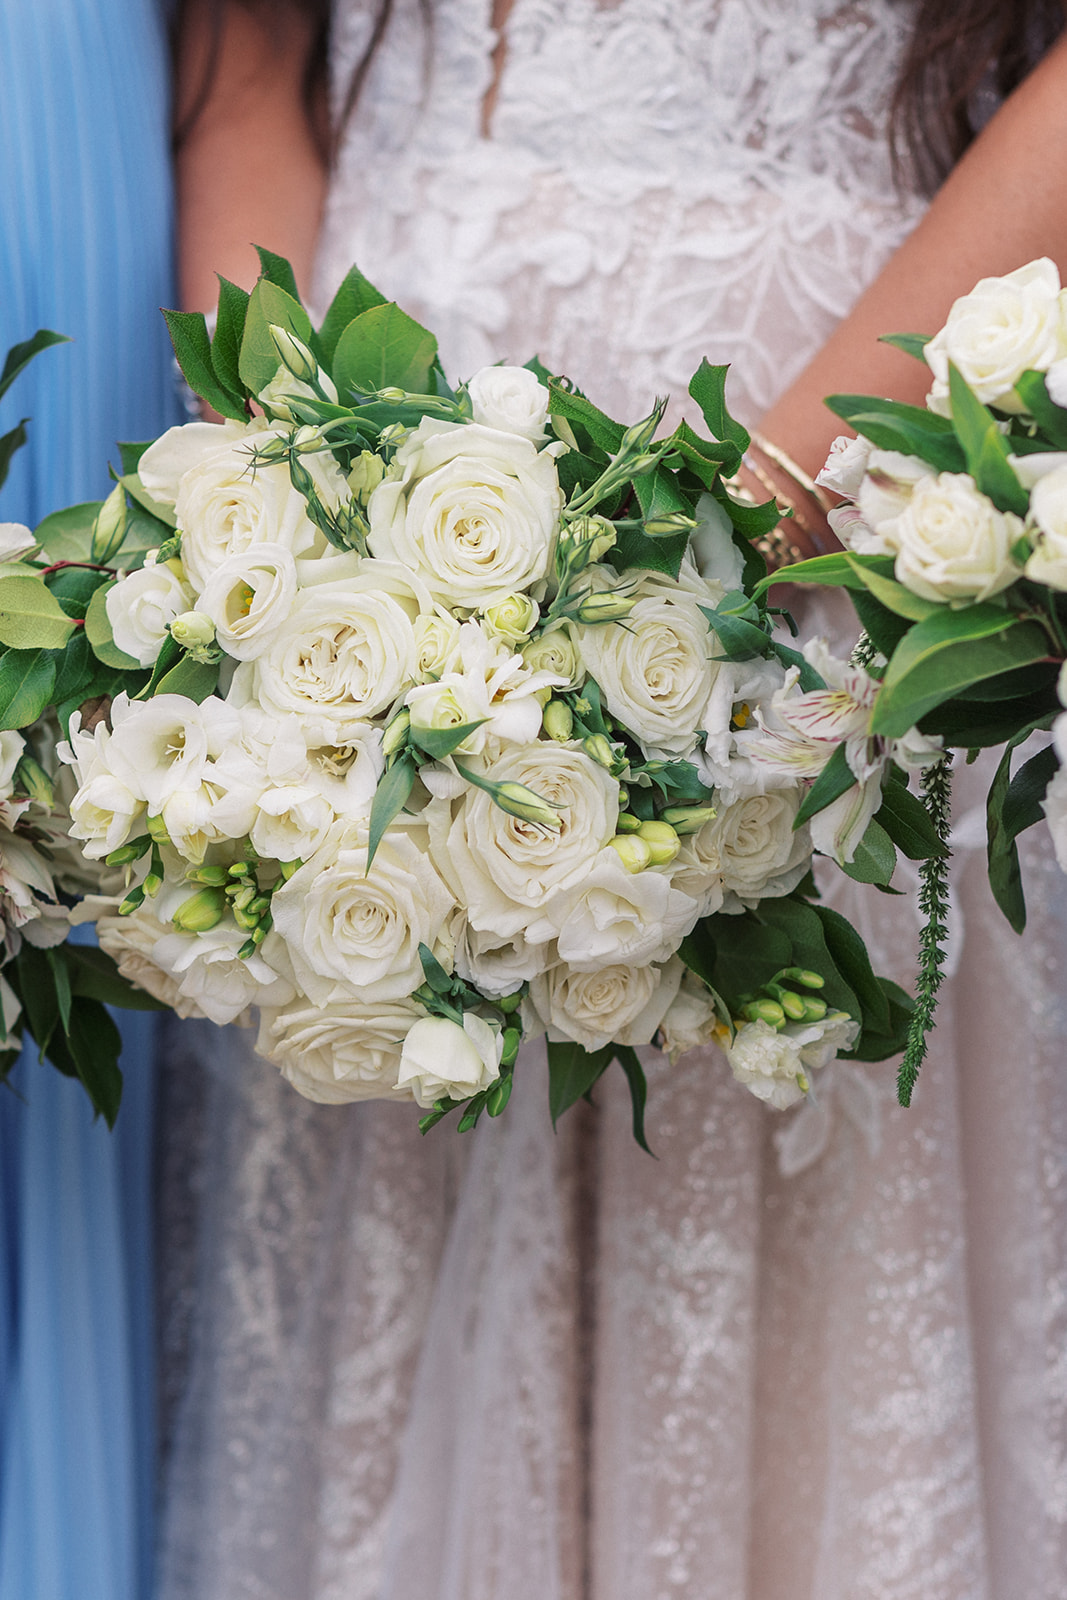 Details of a white rose bouquet held by a bride in a white lace dress